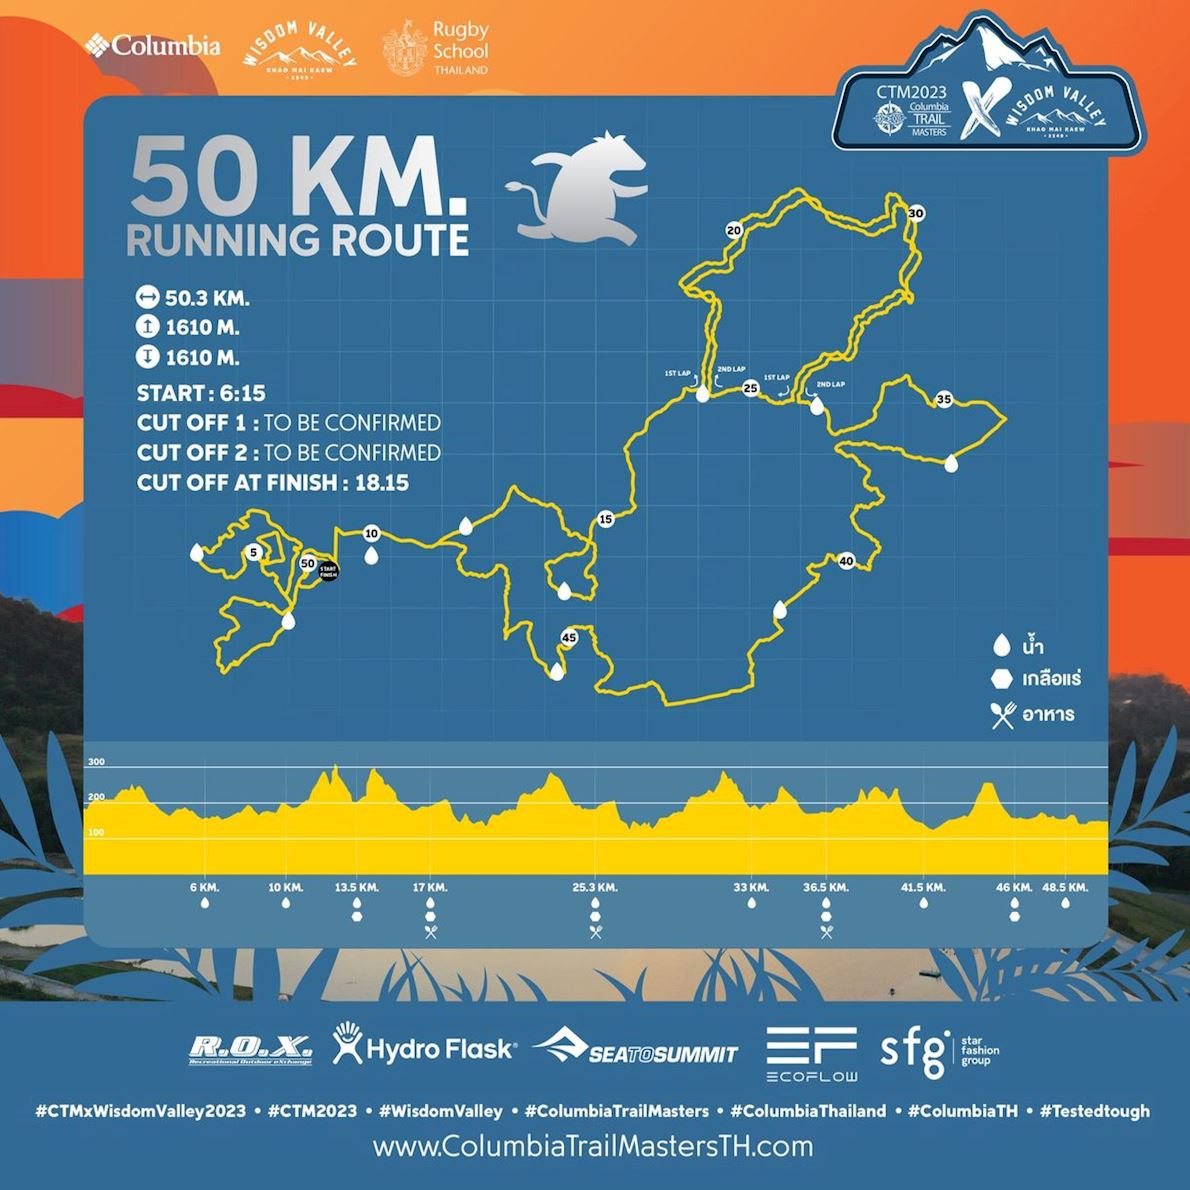 Columbia Trail Masters Pattaya Route Map